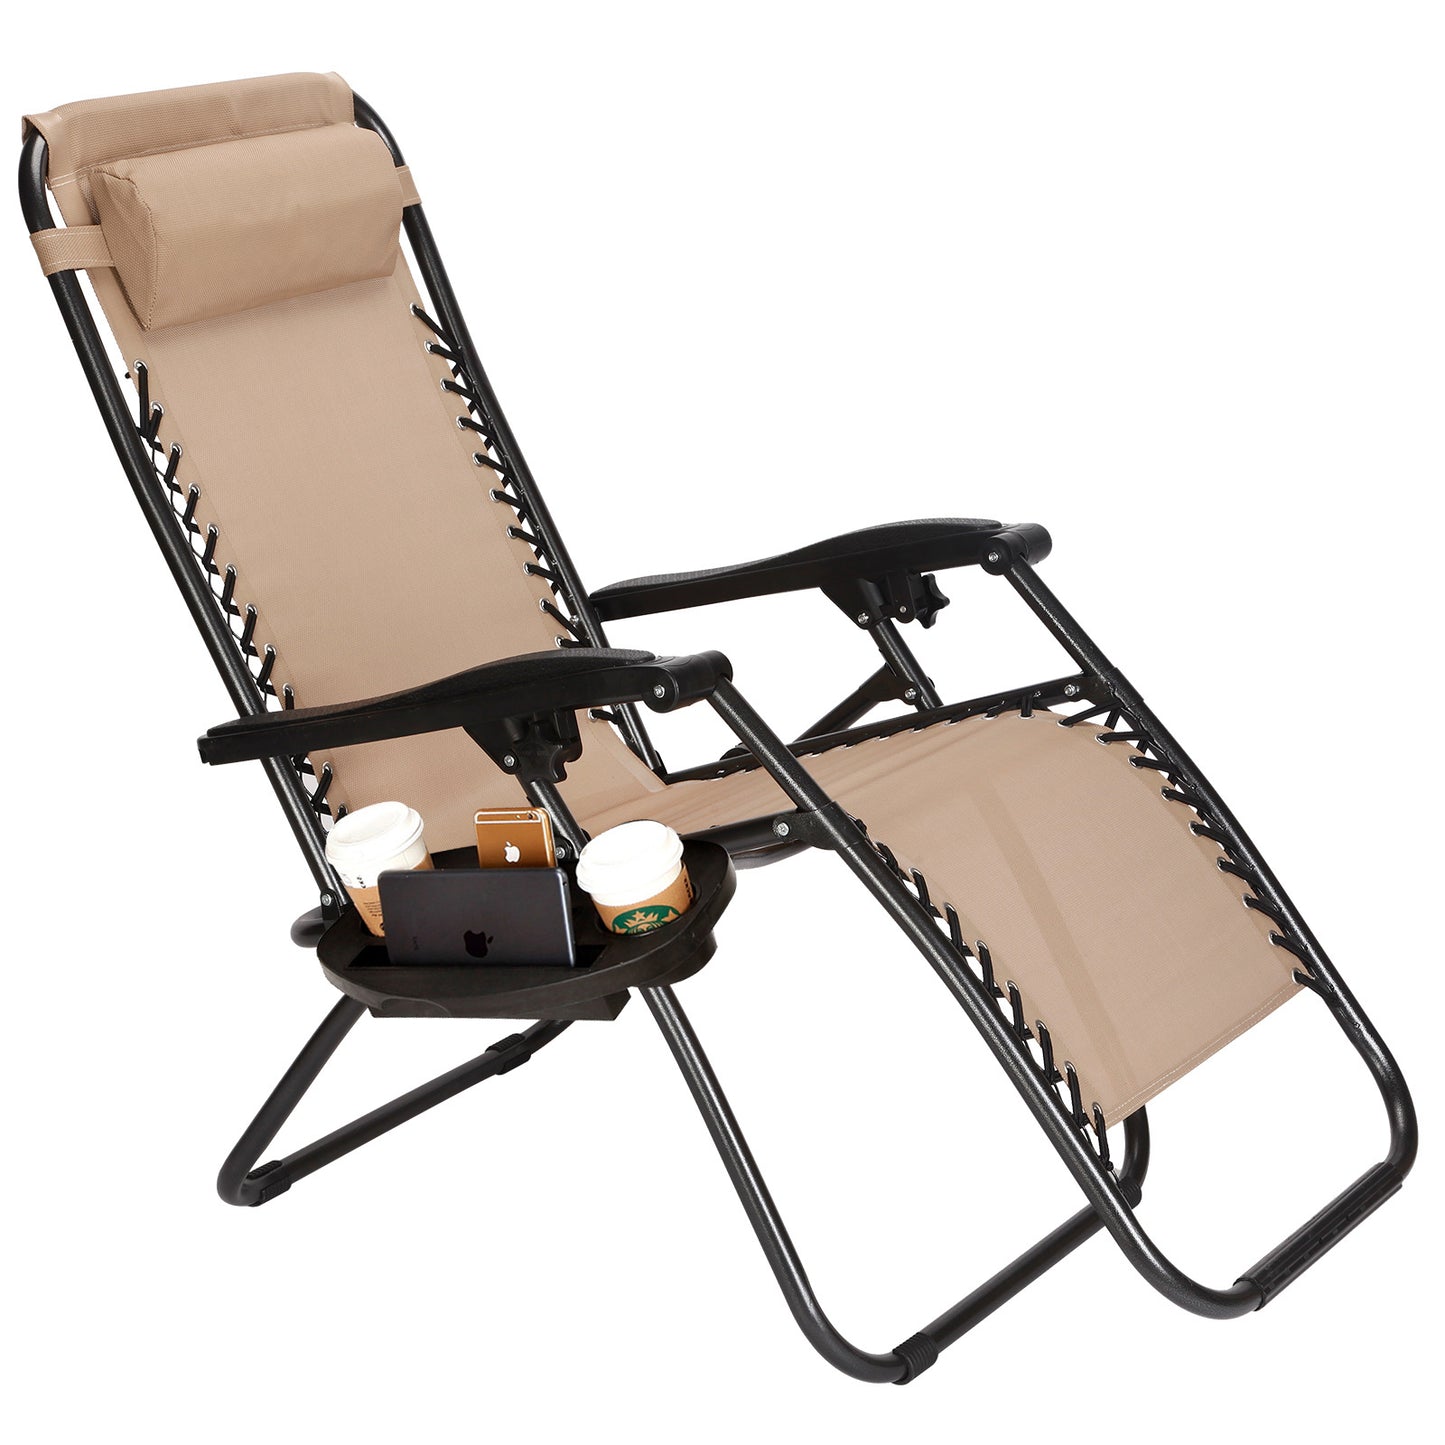 Zero Gravity Outdoor Lounge Chairs Patio Adjustable Folding Reclining Chairs Beach Chairs